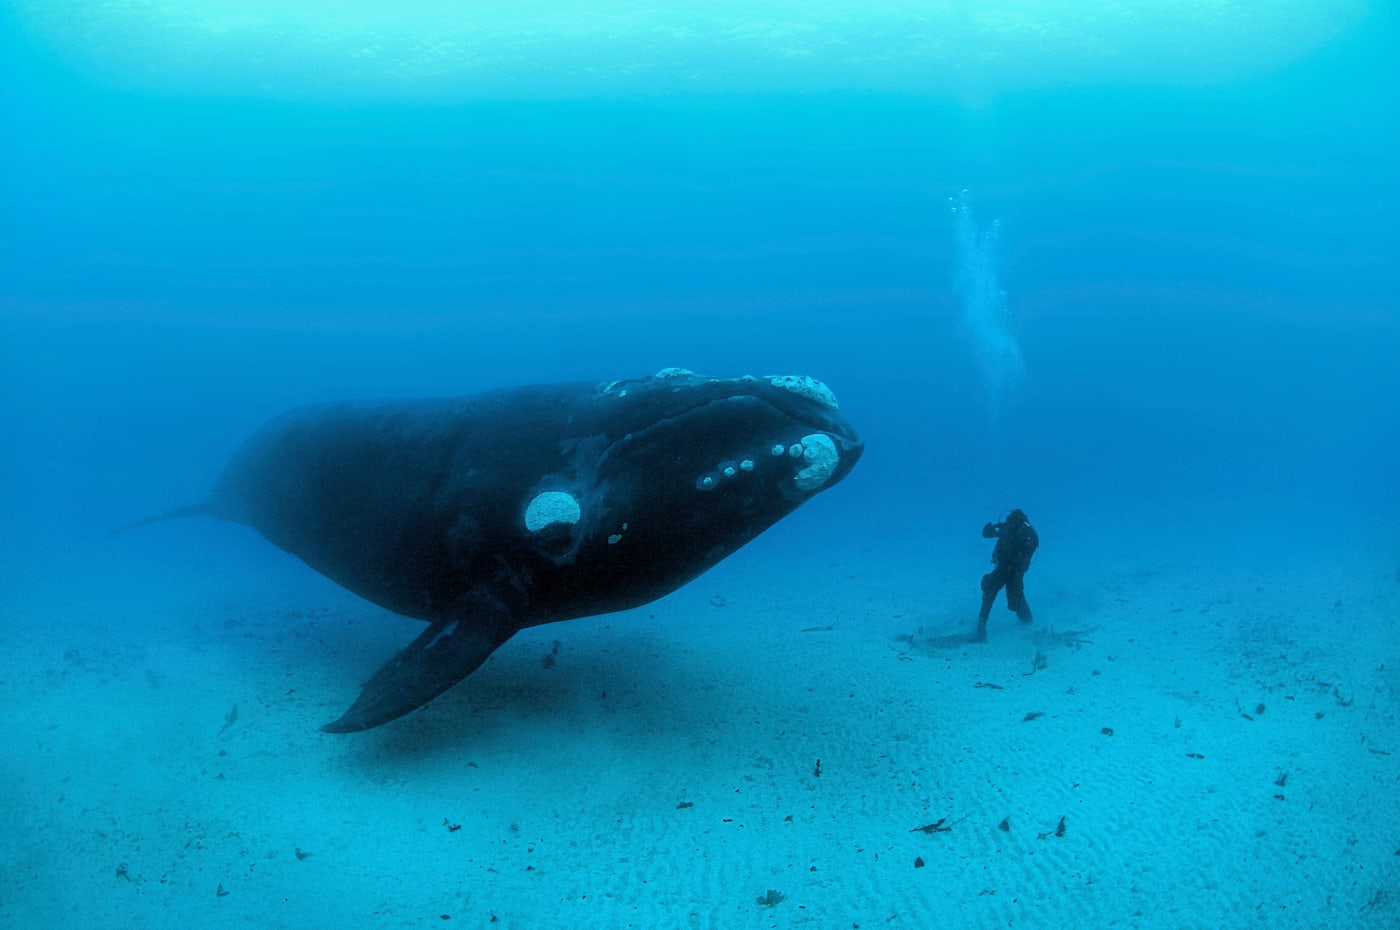 Southern right whale (Eubalaena australis) and a diver underwater off the Auckland Islands, New Zealand (sub Antarctic islands).